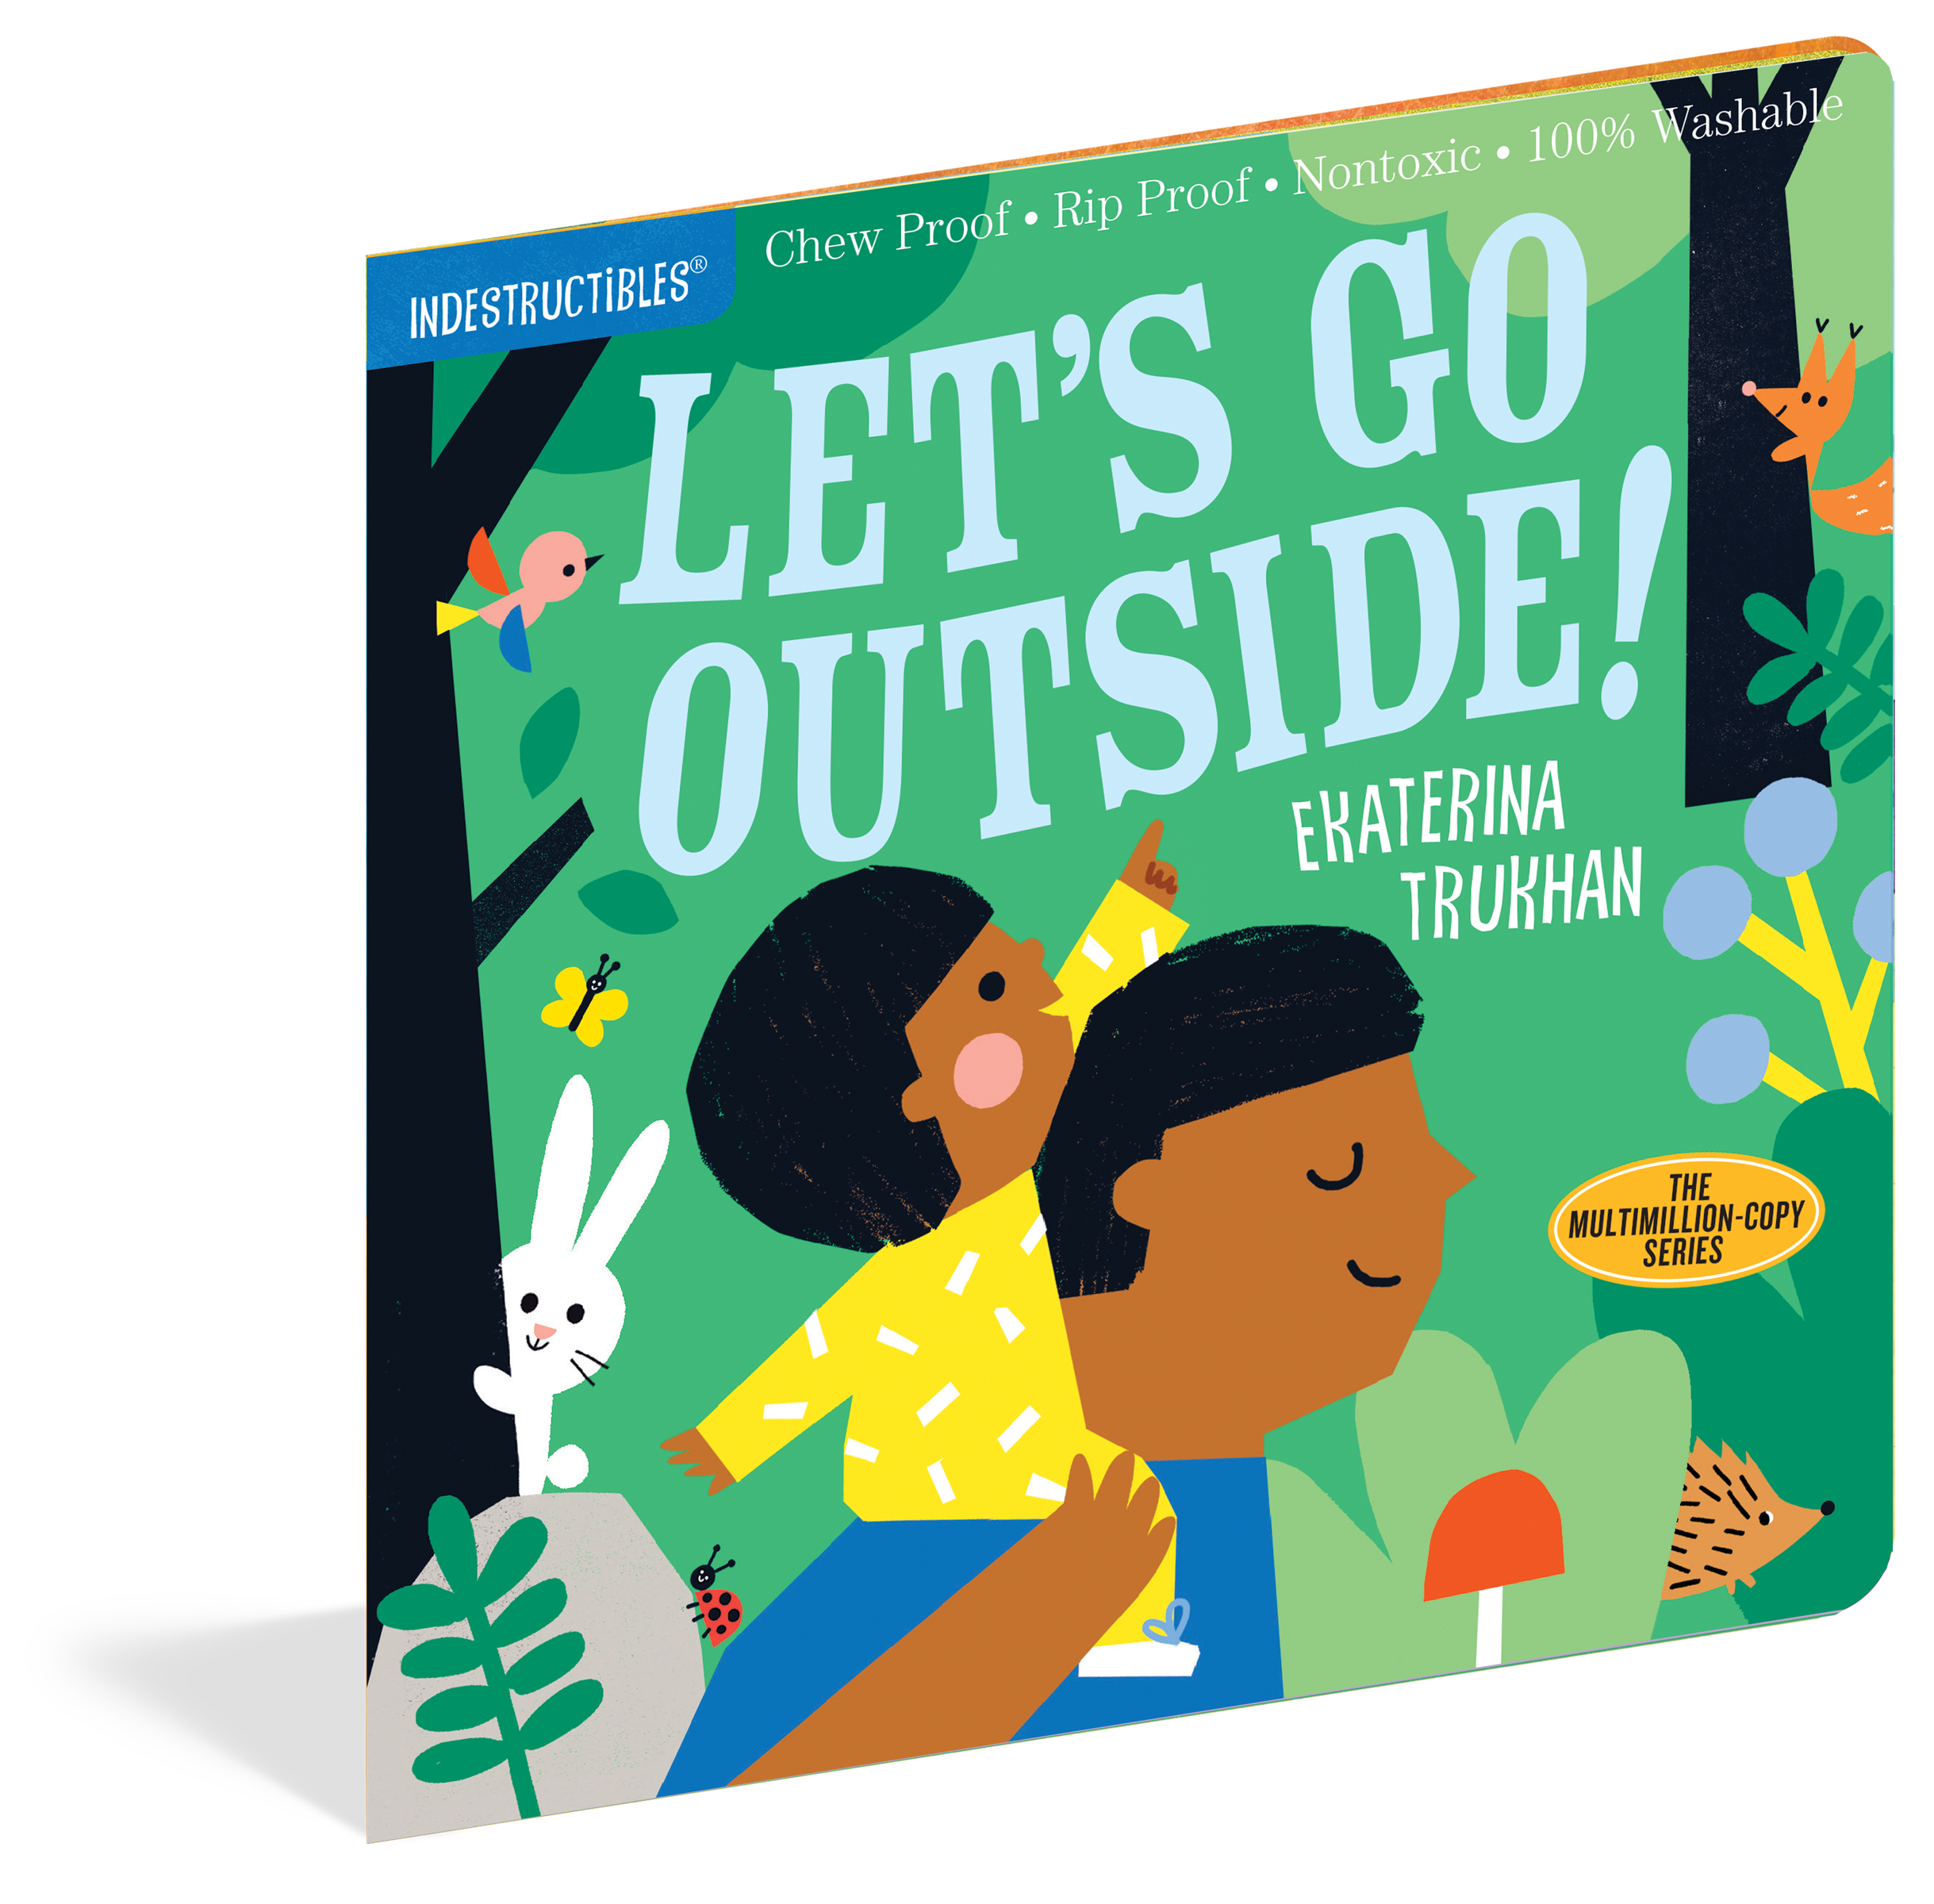 Let's go outside baby book